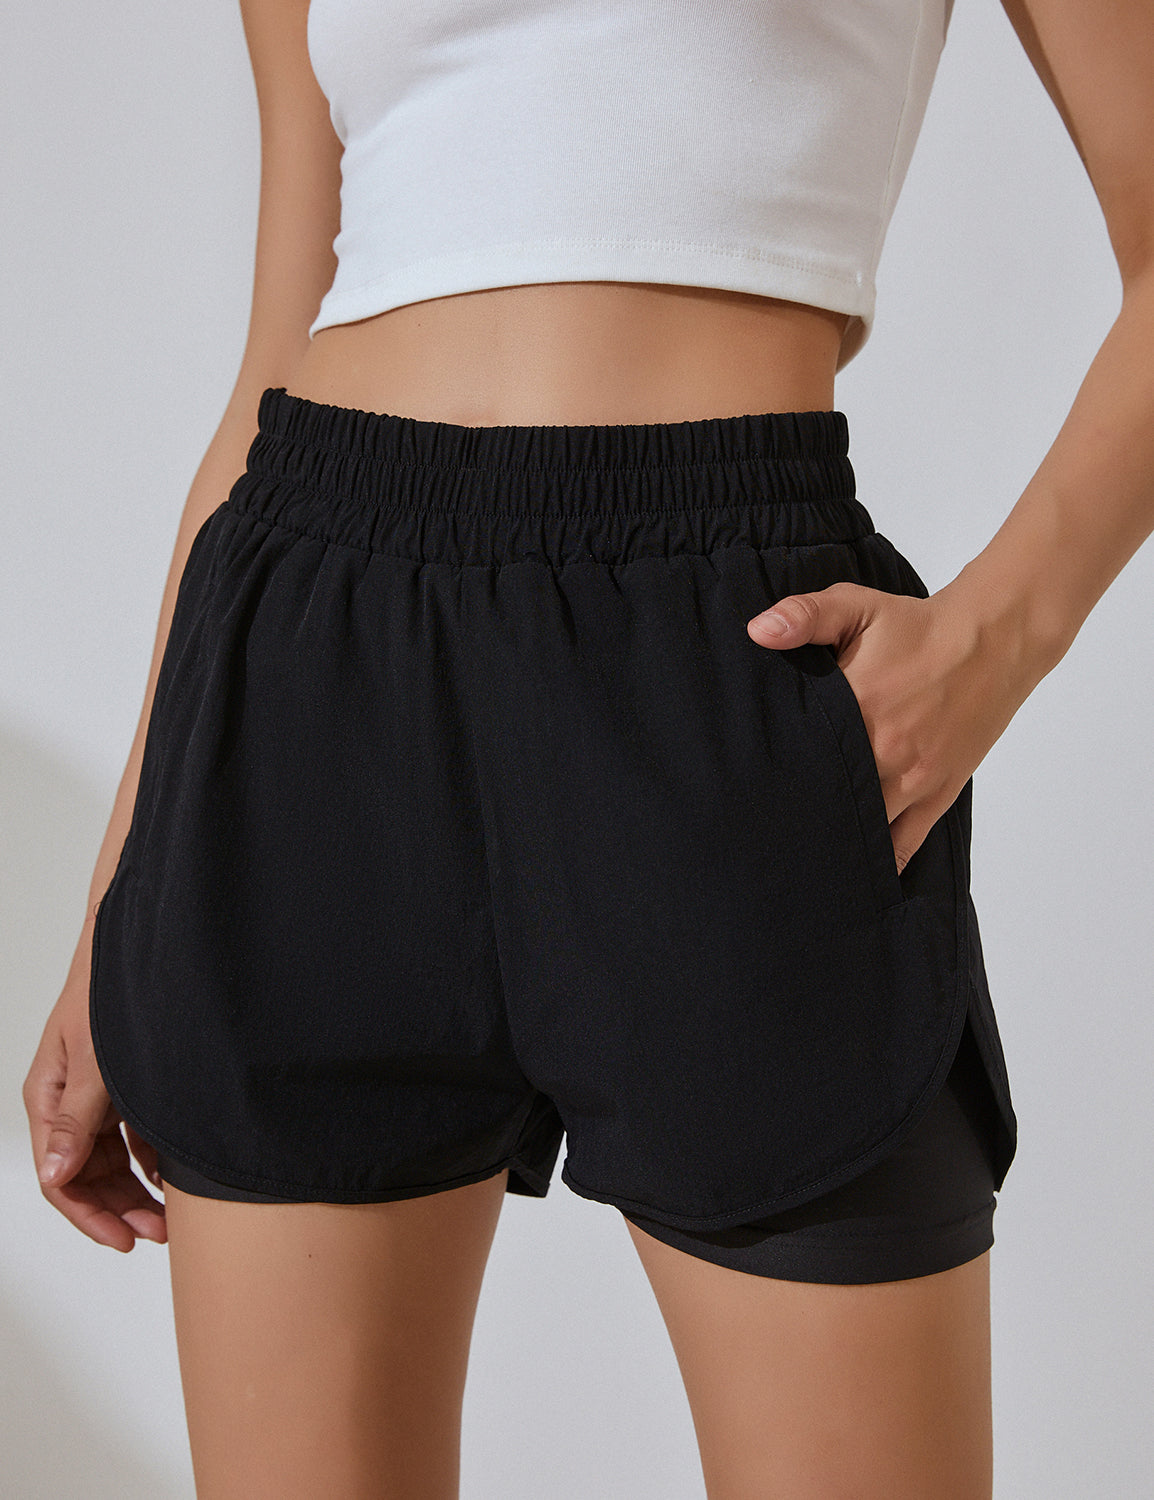 Blooming Jelly Shorts Women's High Waisted Running Shorts